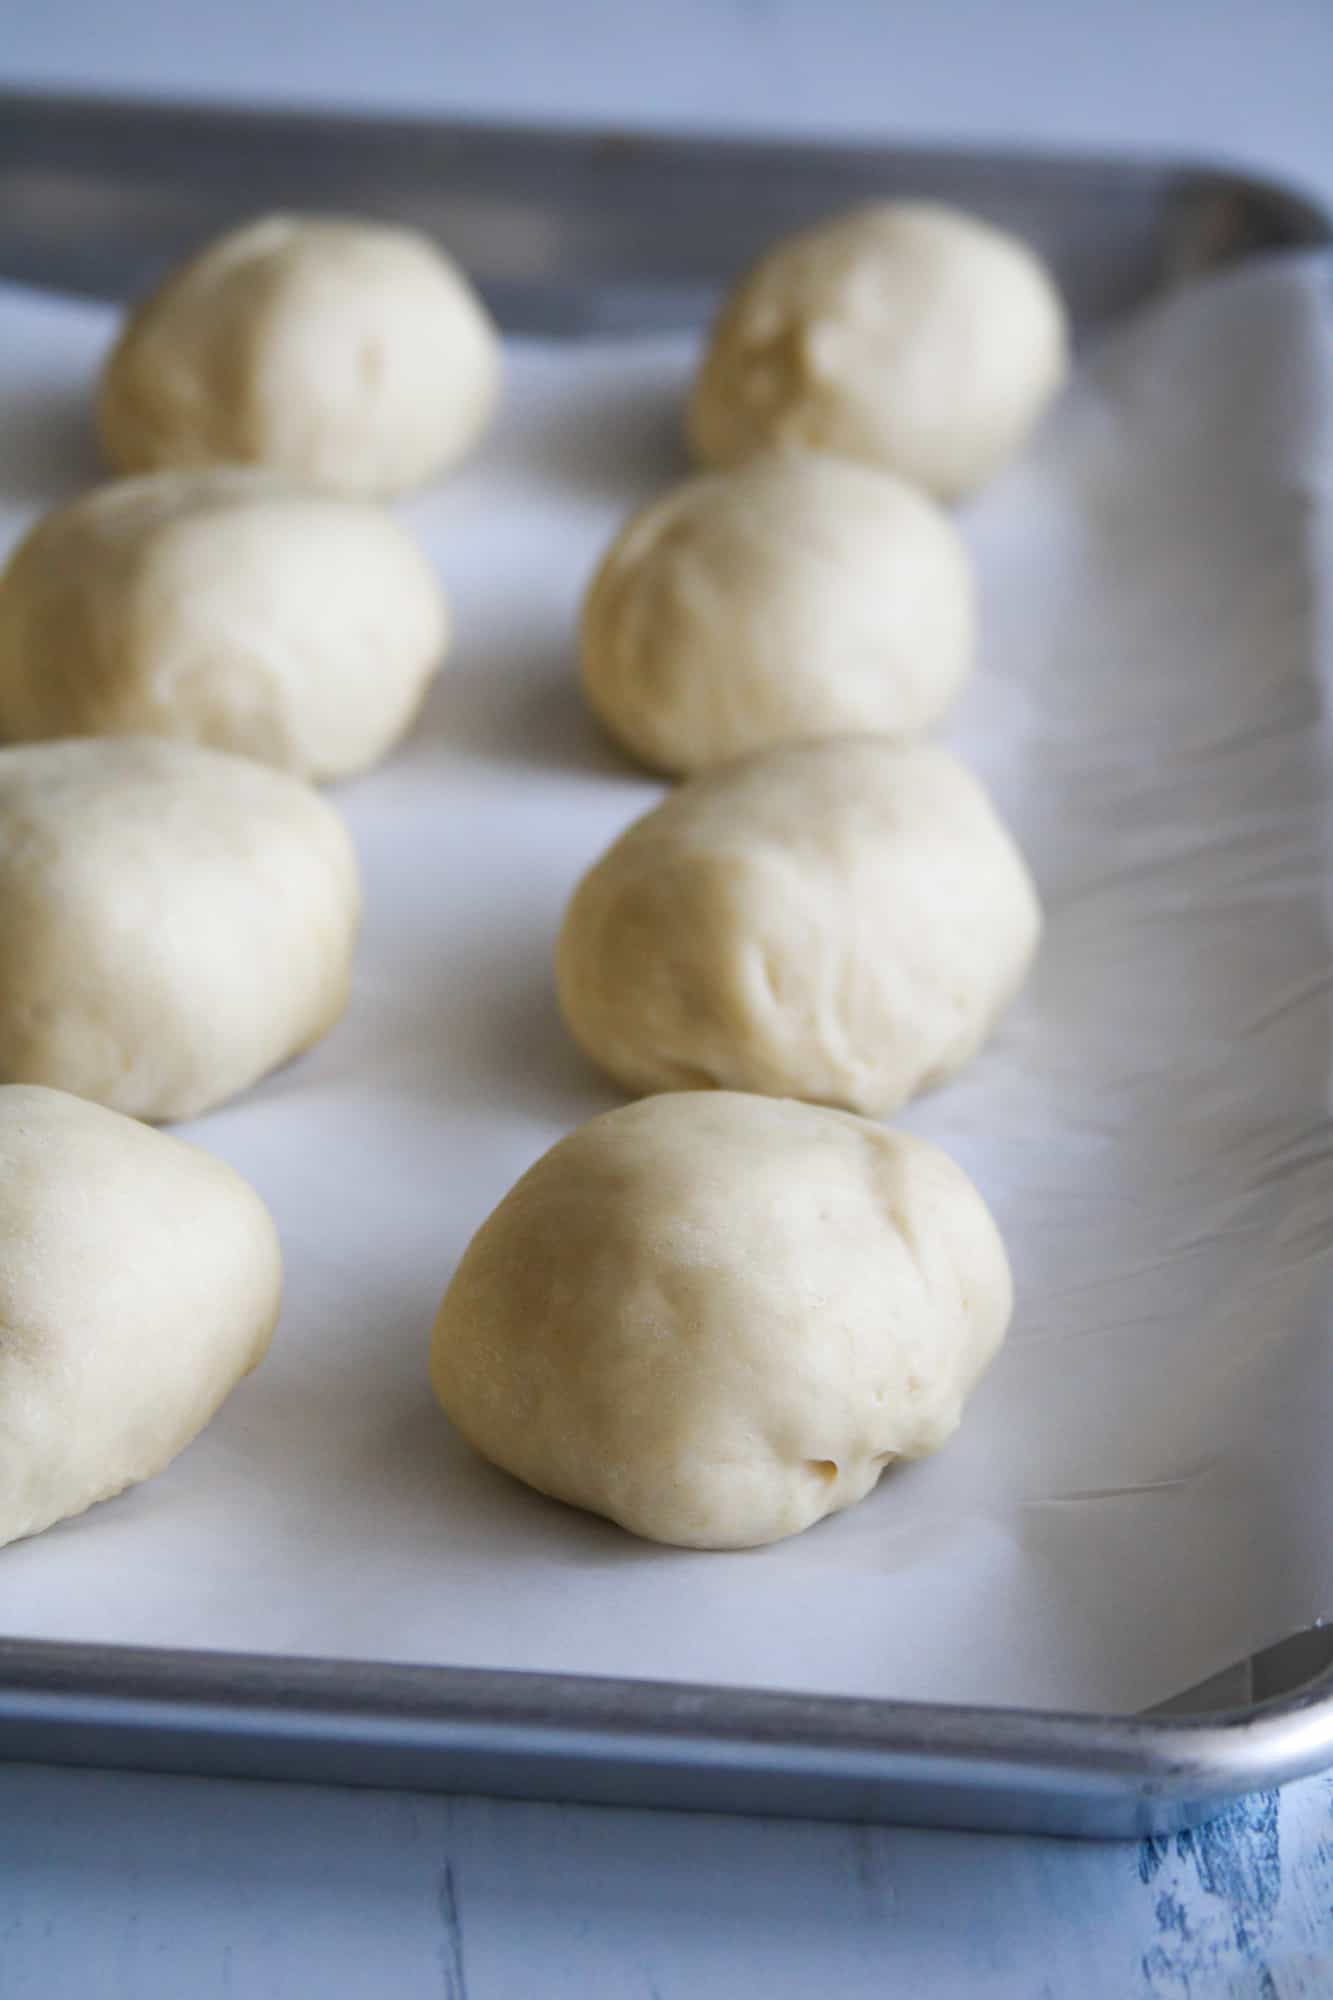 The shaped dough after rising.